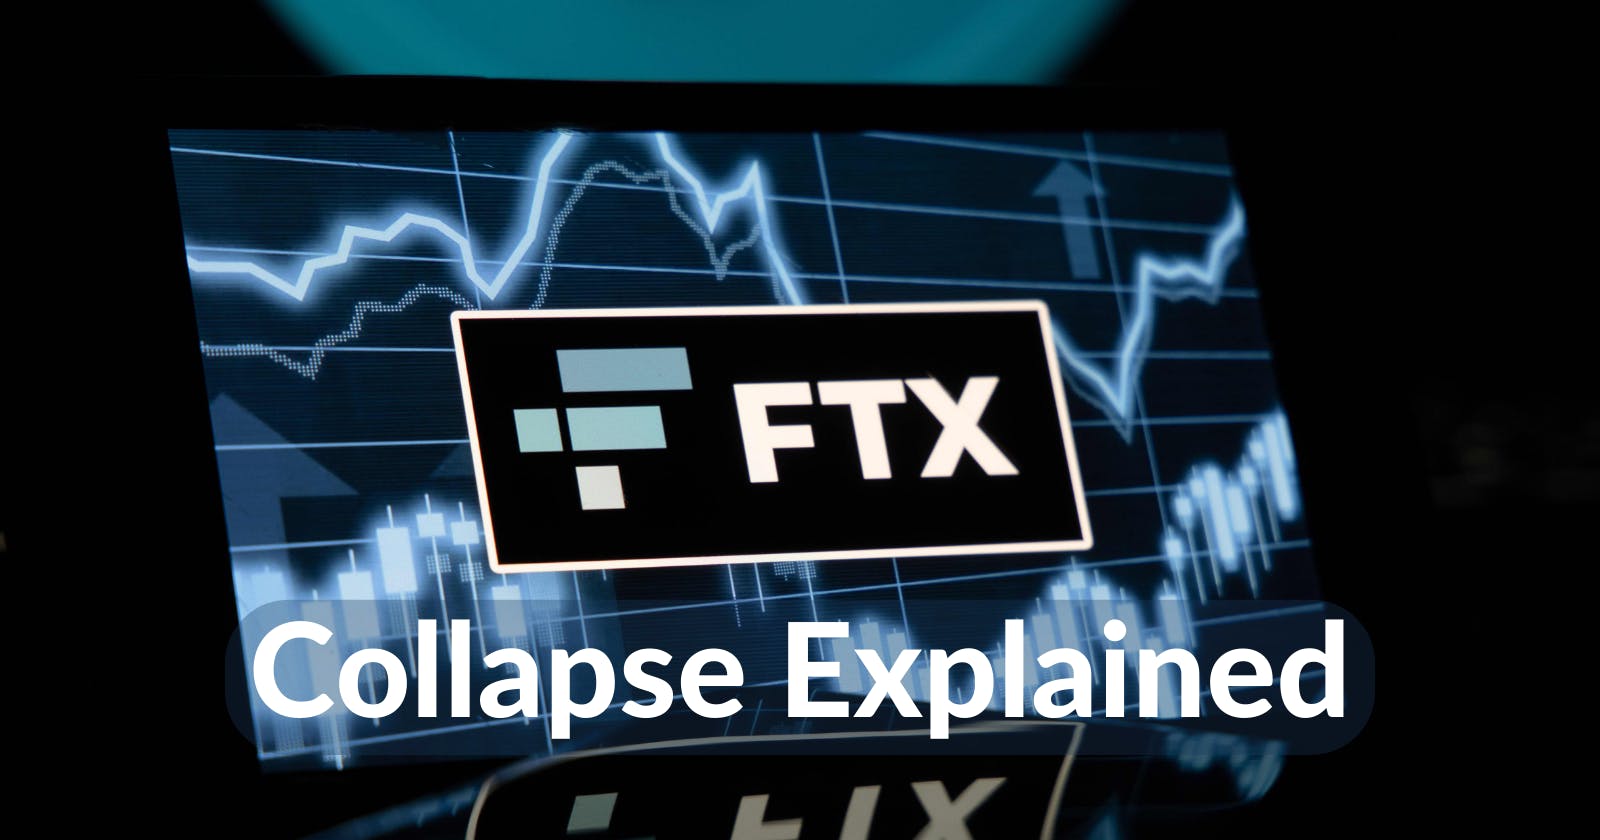 The FTX Collapse: Explained